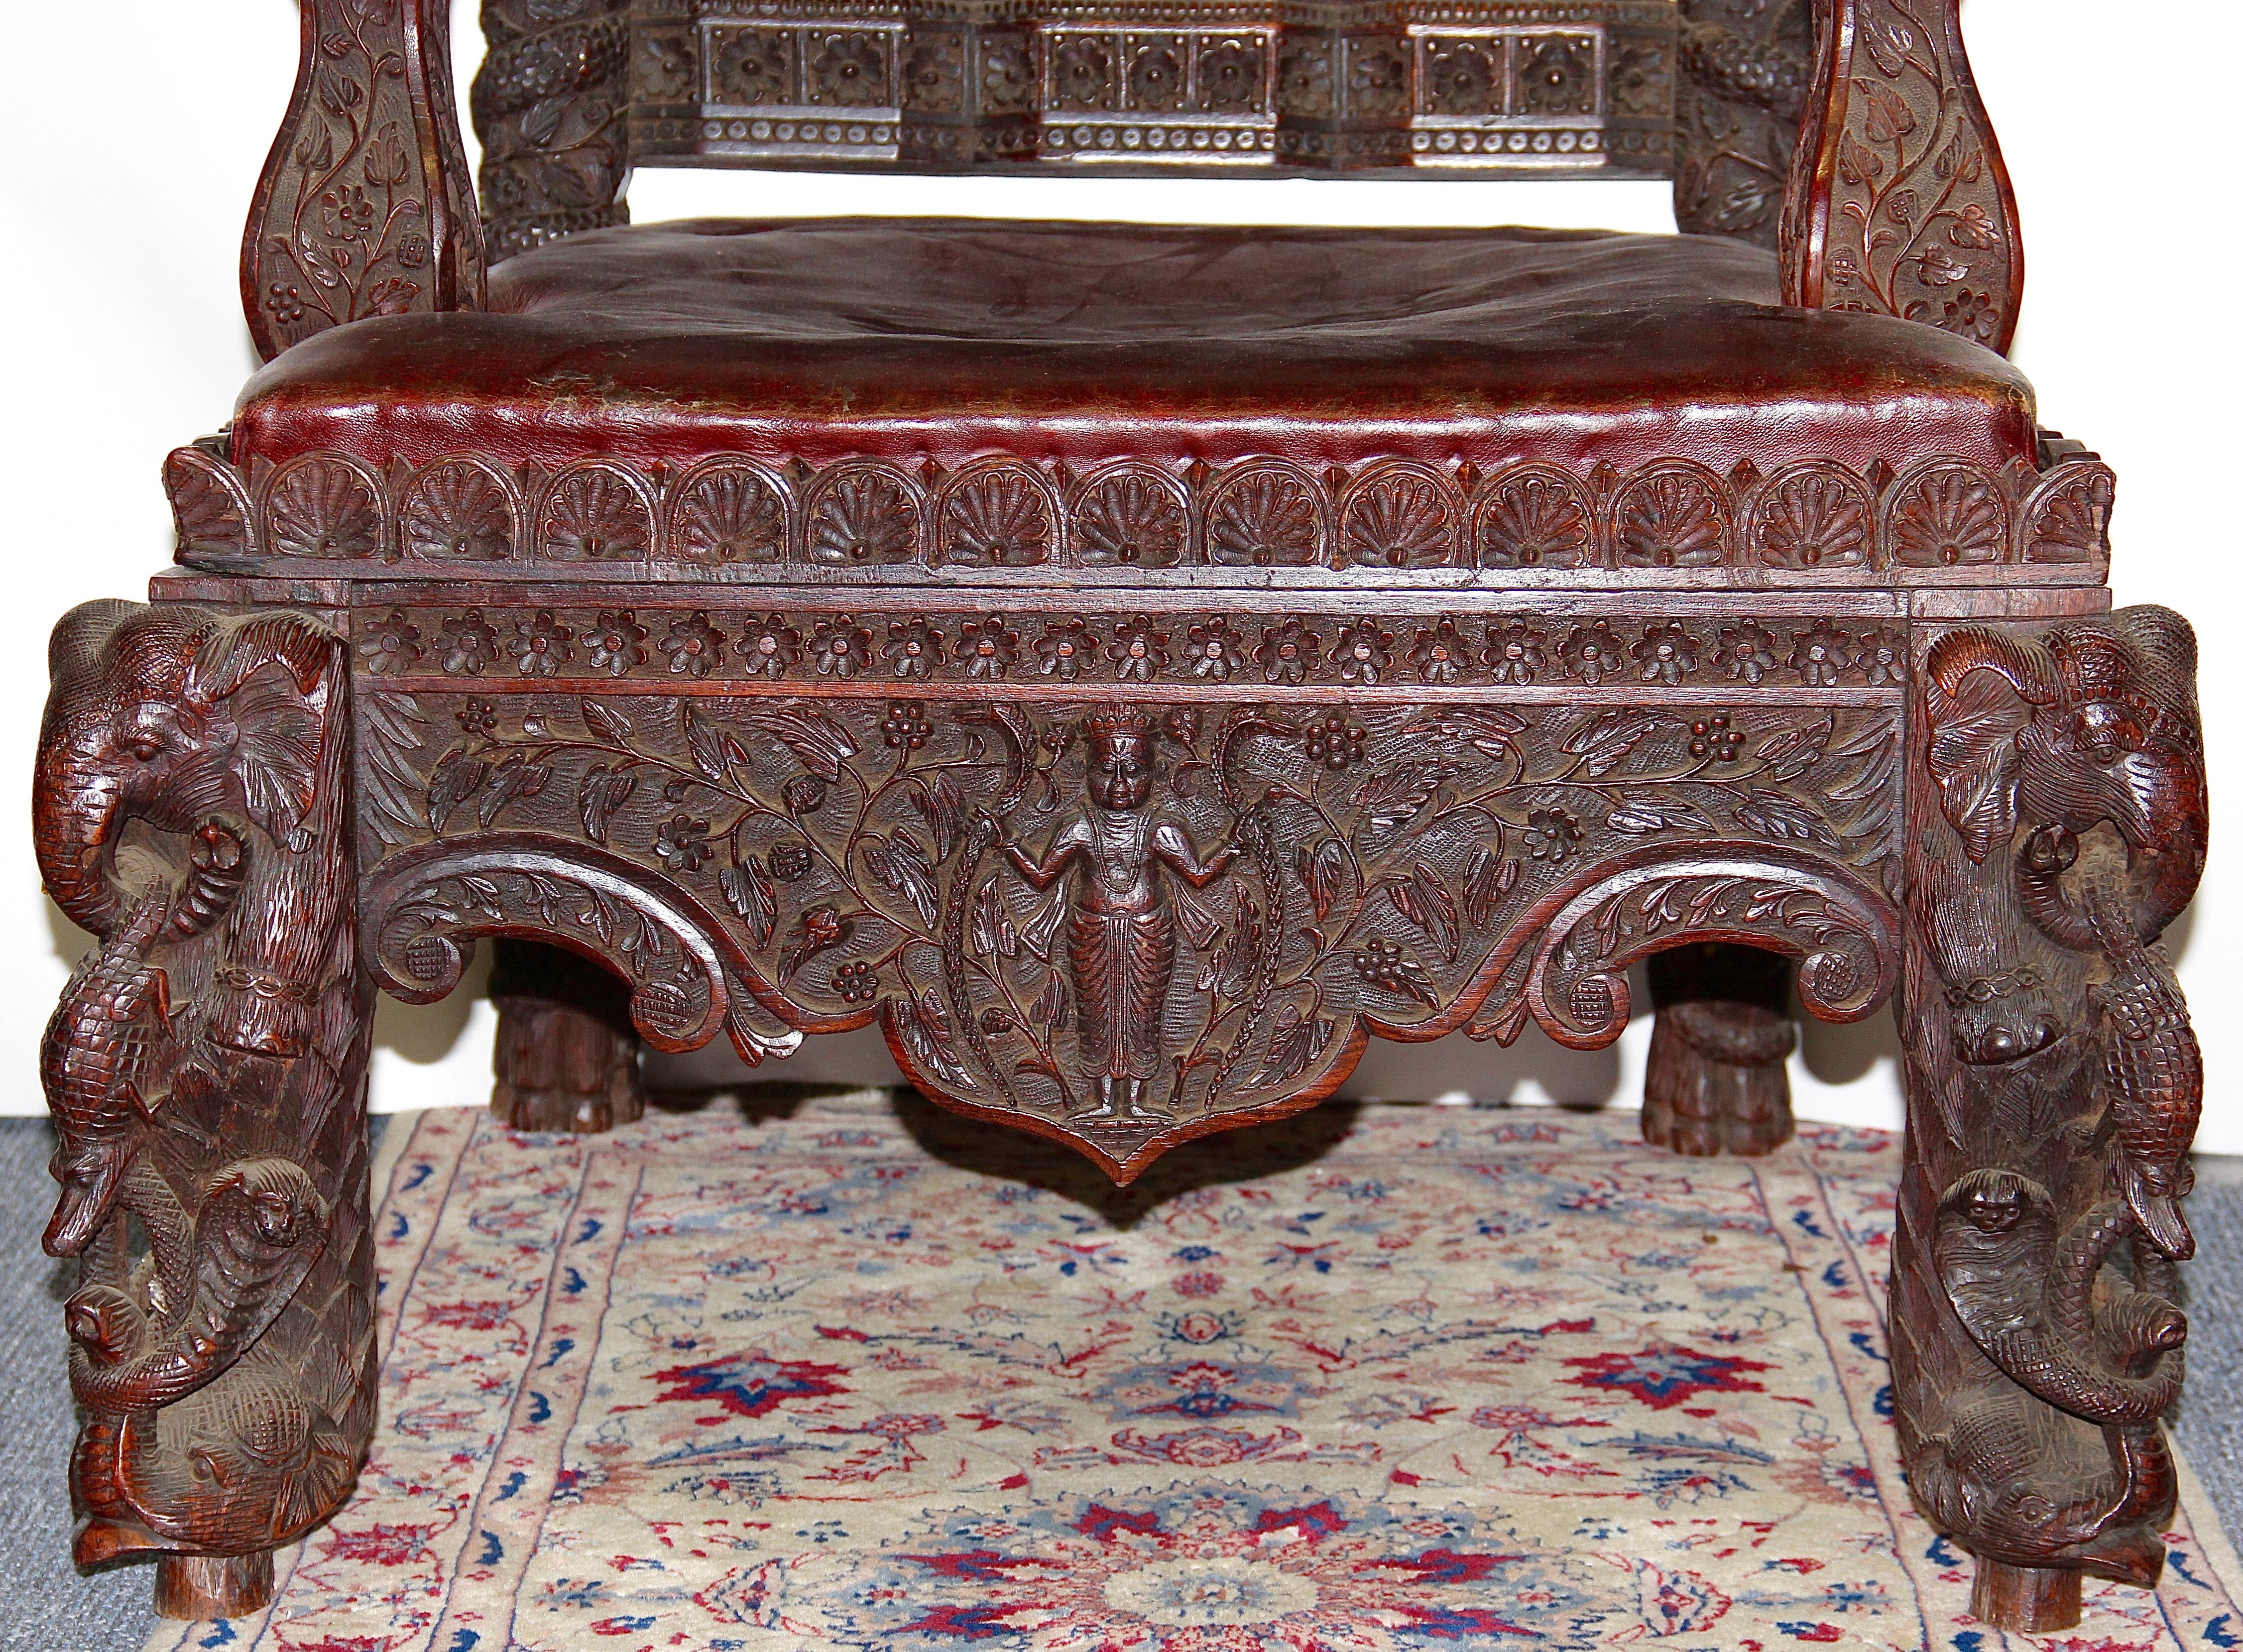 Large, massive and very decorative antique throne chair.
Carefully and in detail carved.

At first glance, the armchair has Asian elements. 
The lion heads and the coat of arms, however, clearly have a European character.
Therefore, the